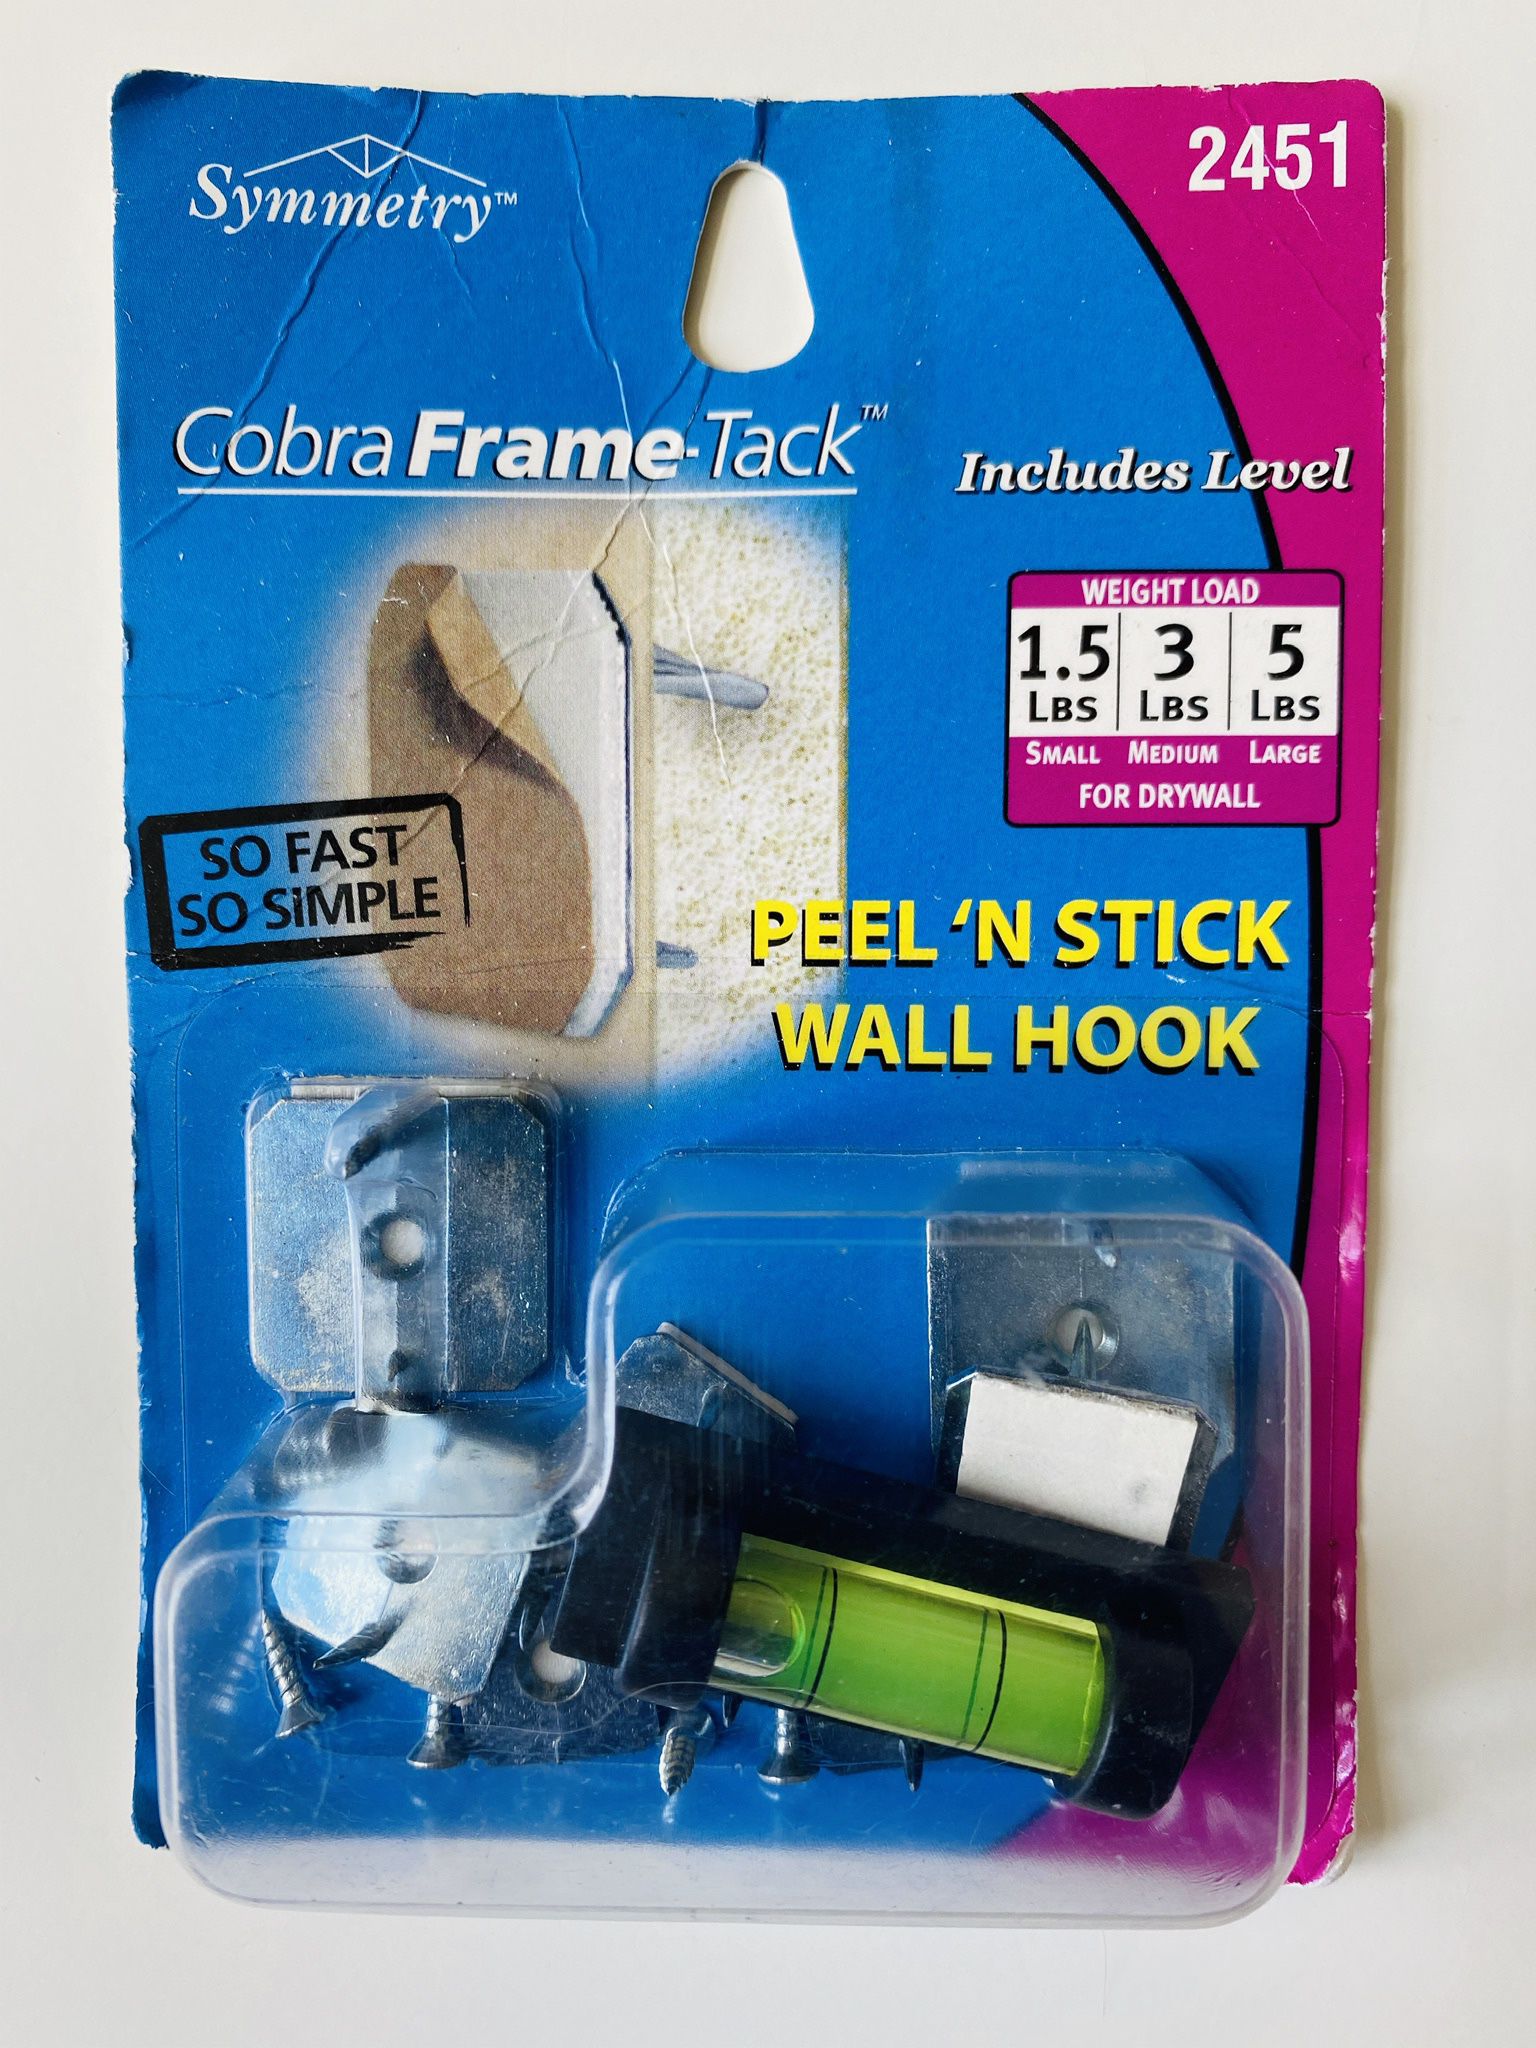 Cobra Frame-Track. Includes level. Peel’N Stick Wall Hook. Put your favorite frame on the wall Fast and Easy. New. Still sealed in original packaging.